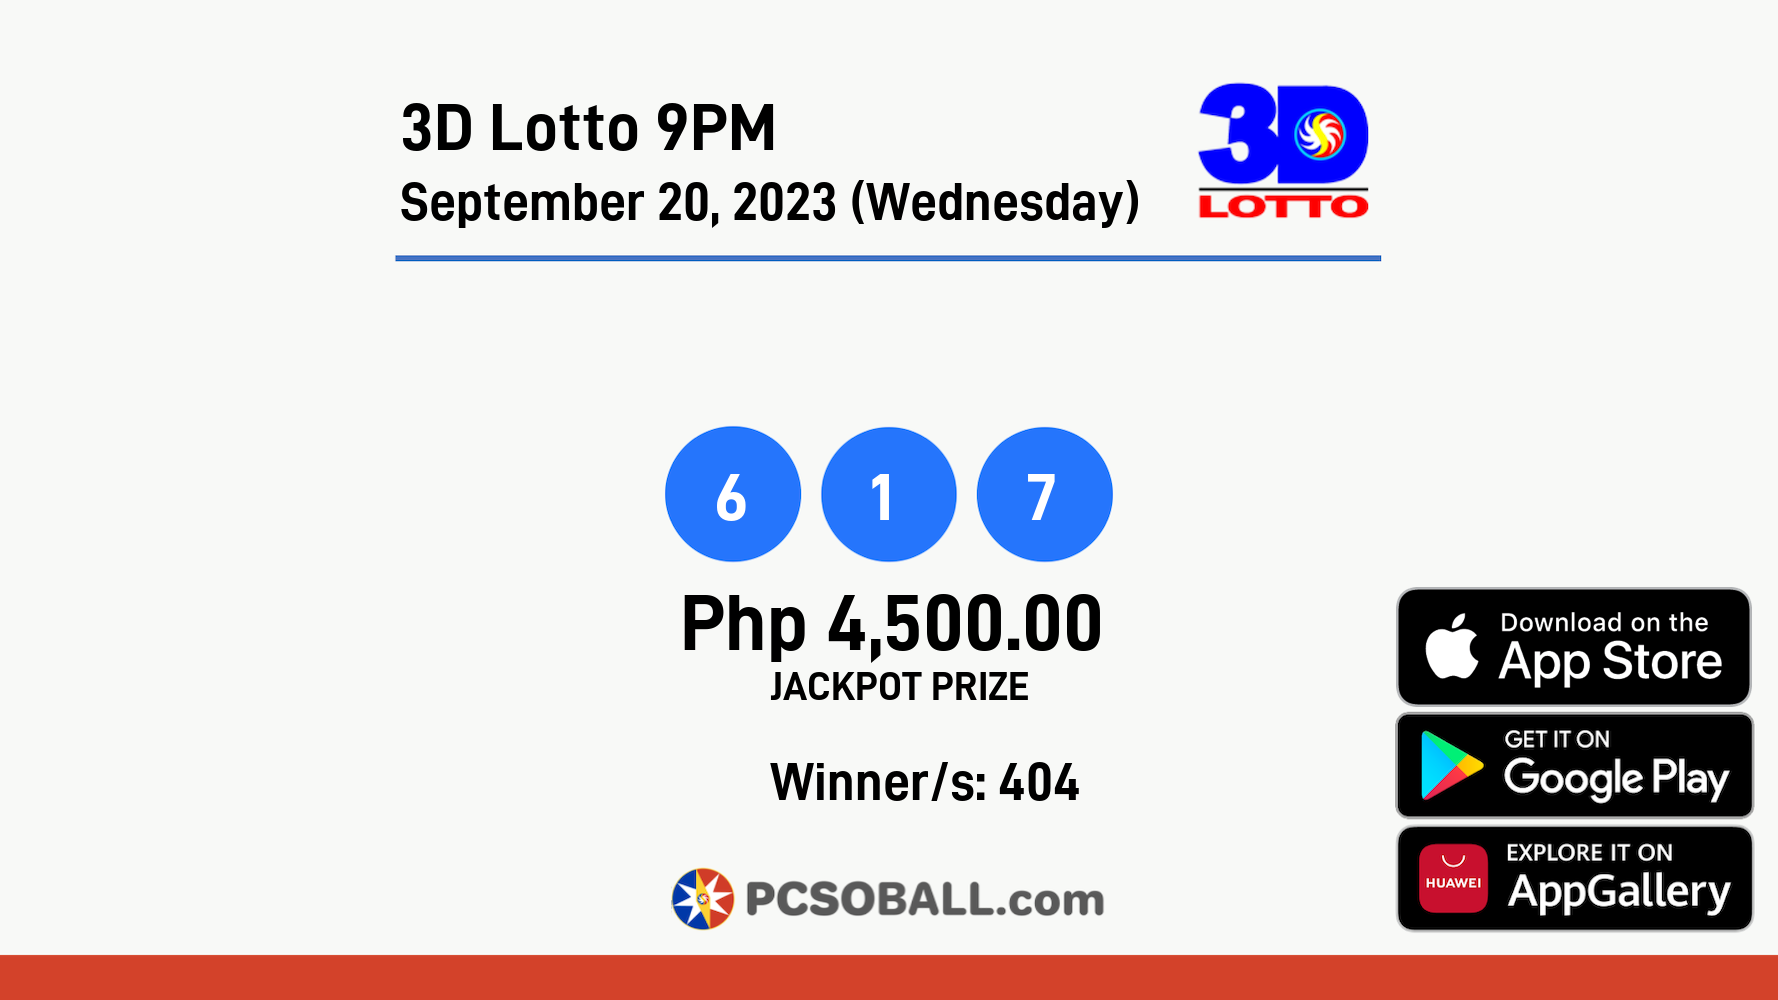 3D Lotto 9PM September 20, 2023 (Wednesday) Result